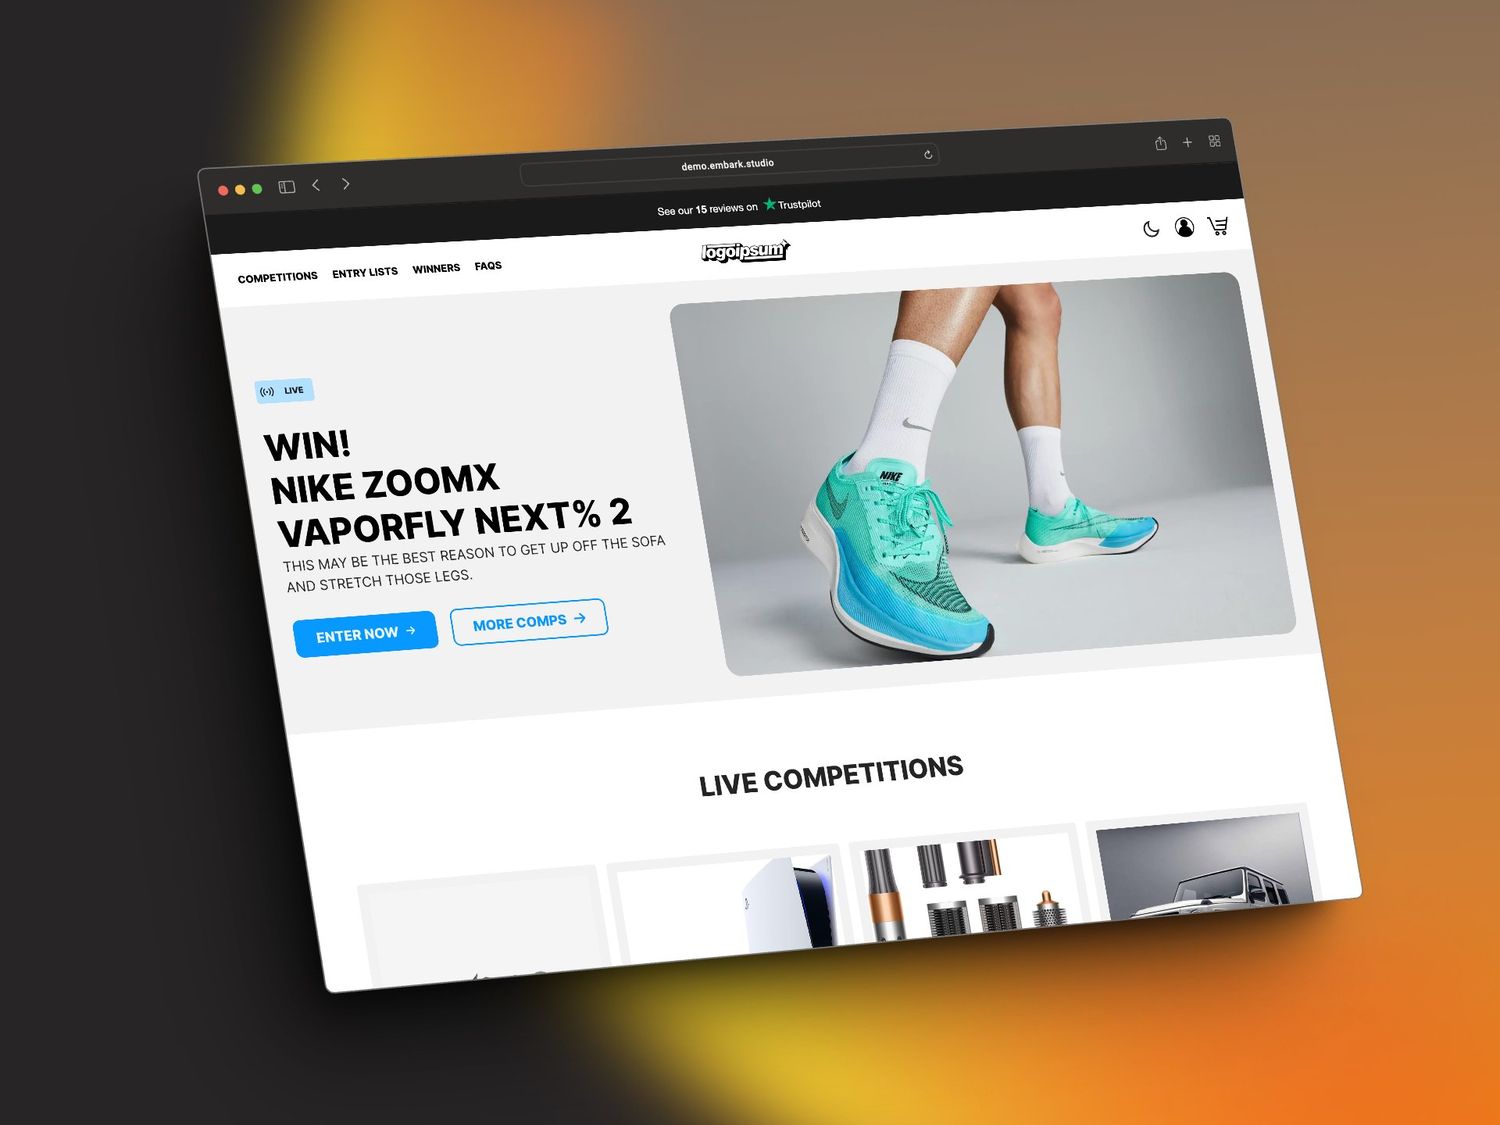 Website displaying a competition to win a pair of Nike ZoomX Vaporfly Next% 2 shoes, with an image of the shoes and various other competitions listed below.